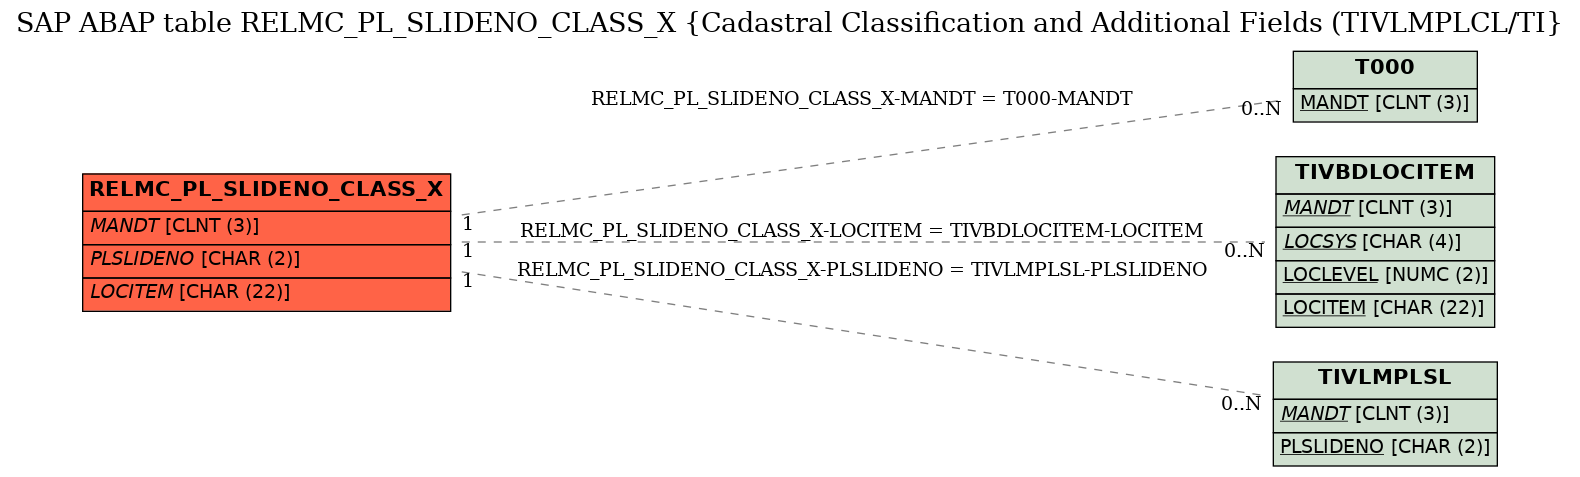 E-R Diagram for table RELMC_PL_SLIDENO_CLASS_X (Cadastral Classification and Additional Fields (TIVLMPLCL/TI)